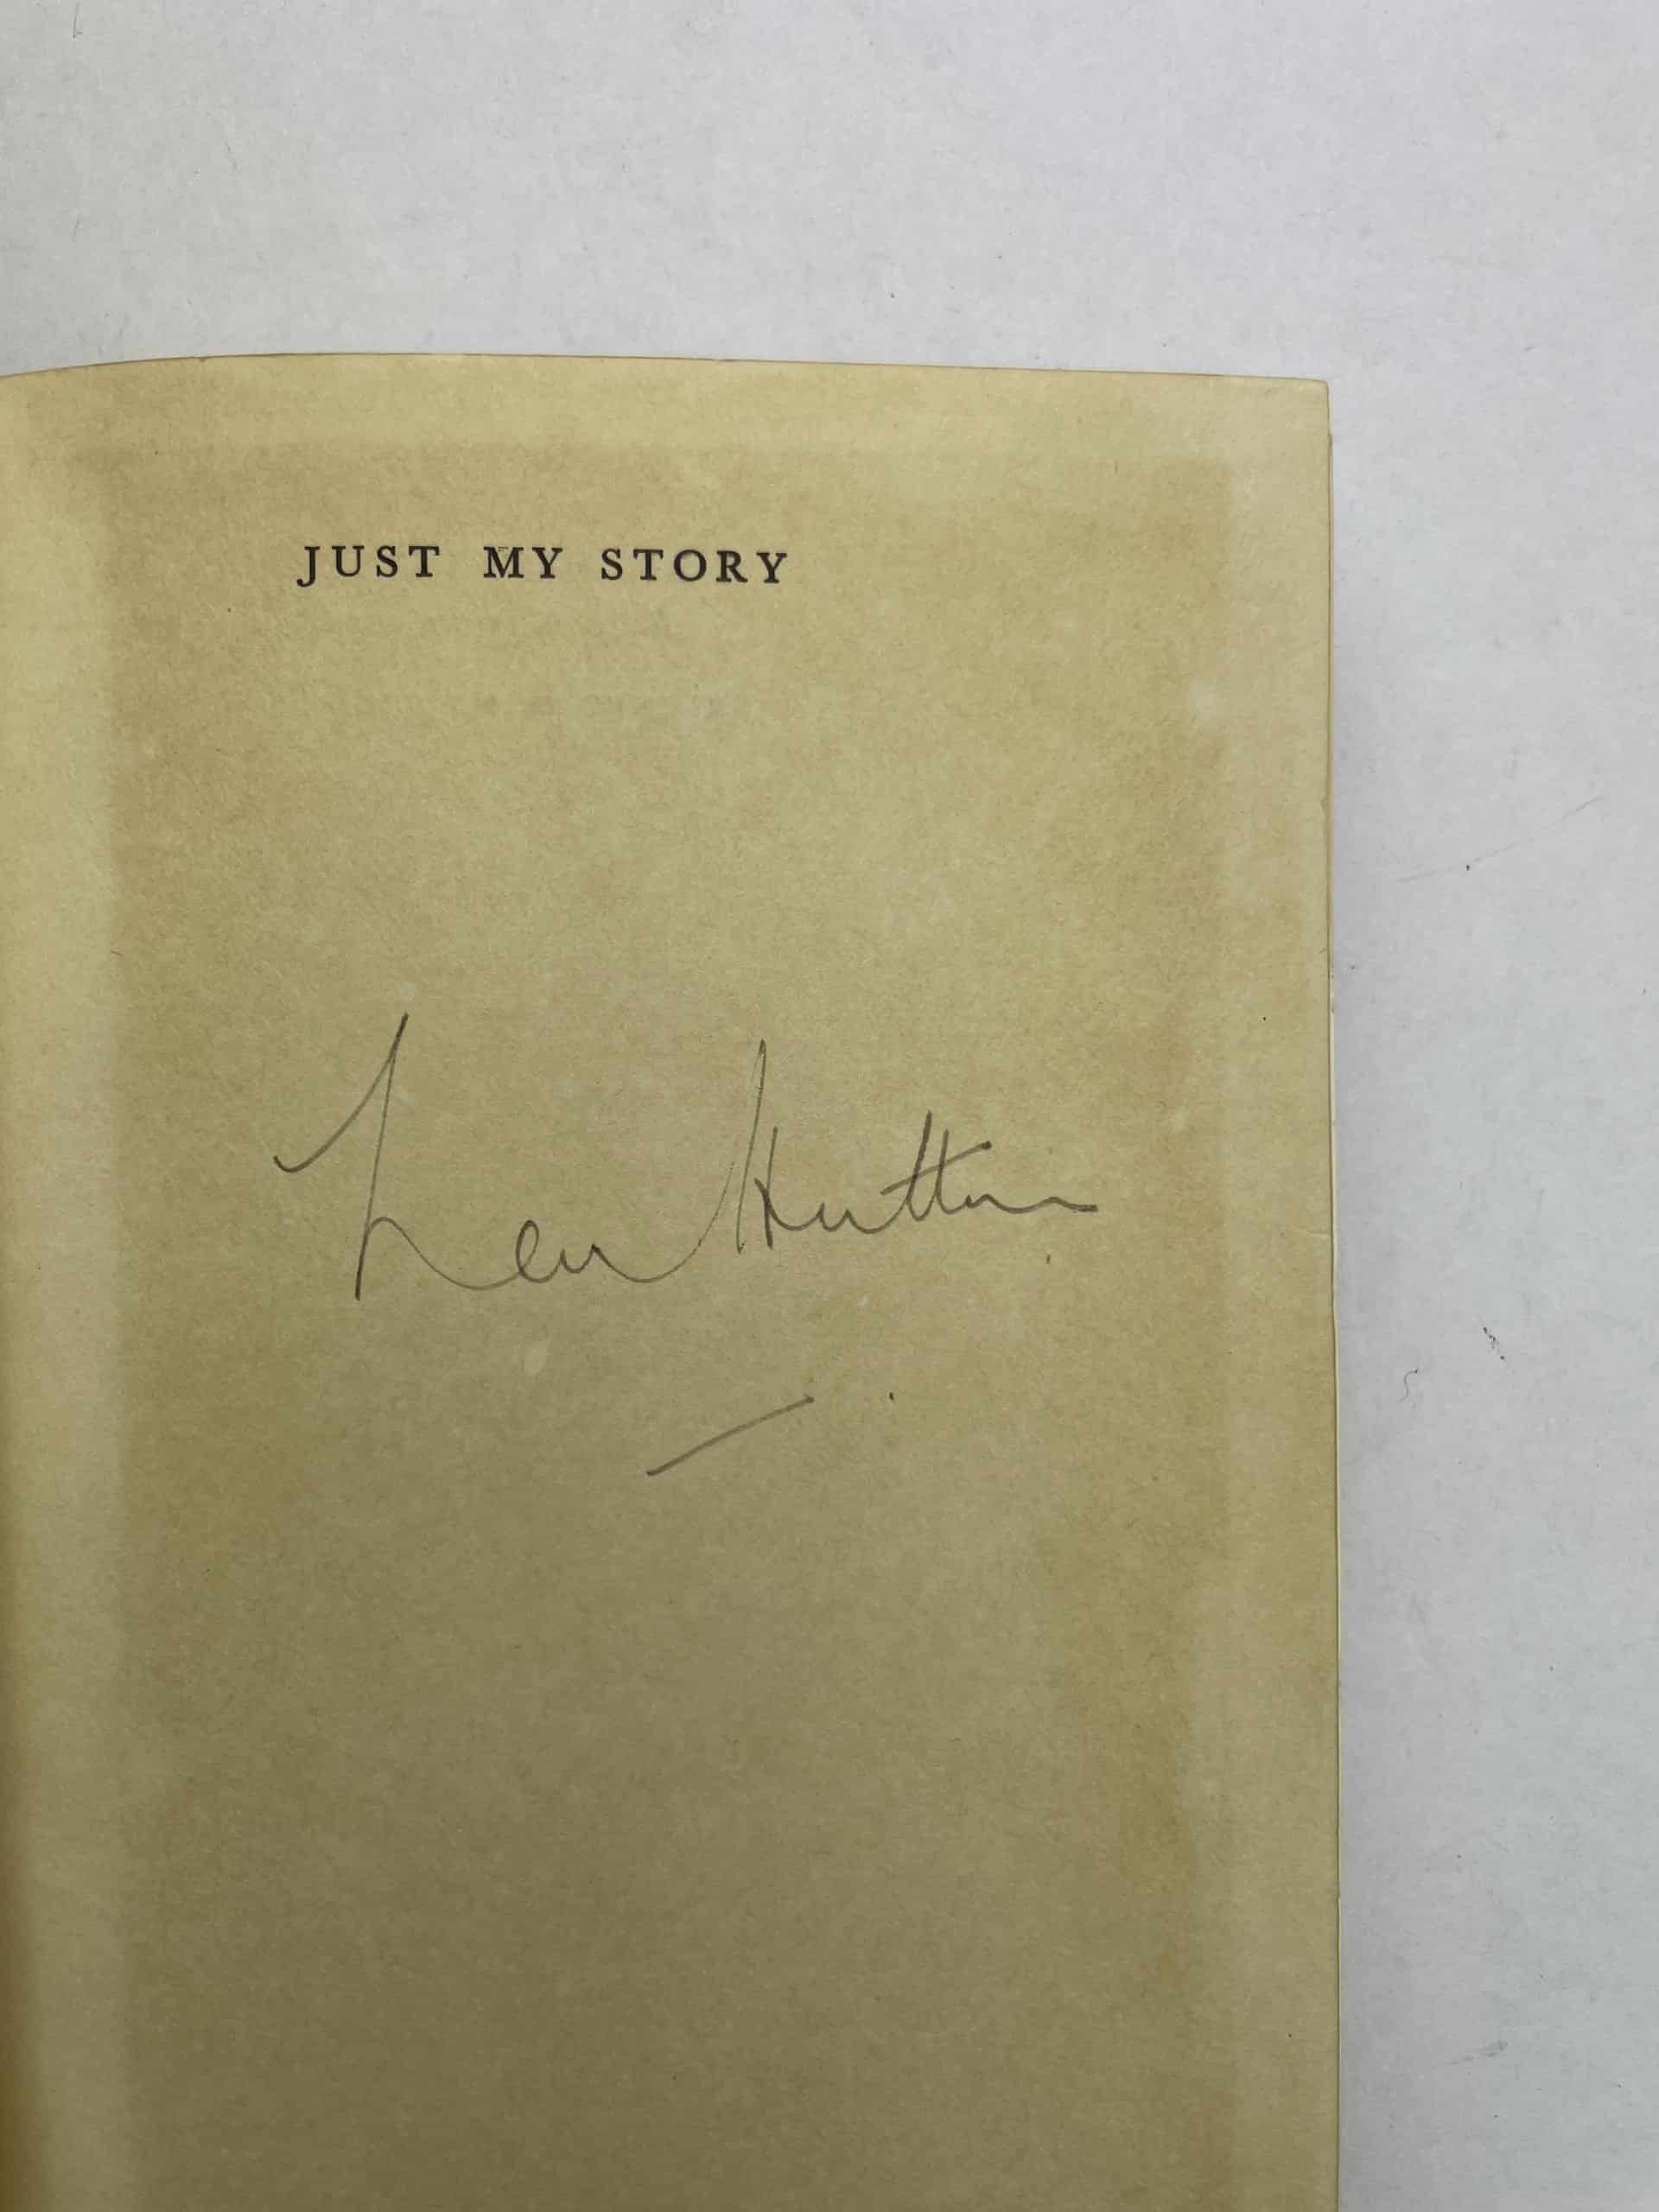 len hutton just my story signed 145 2